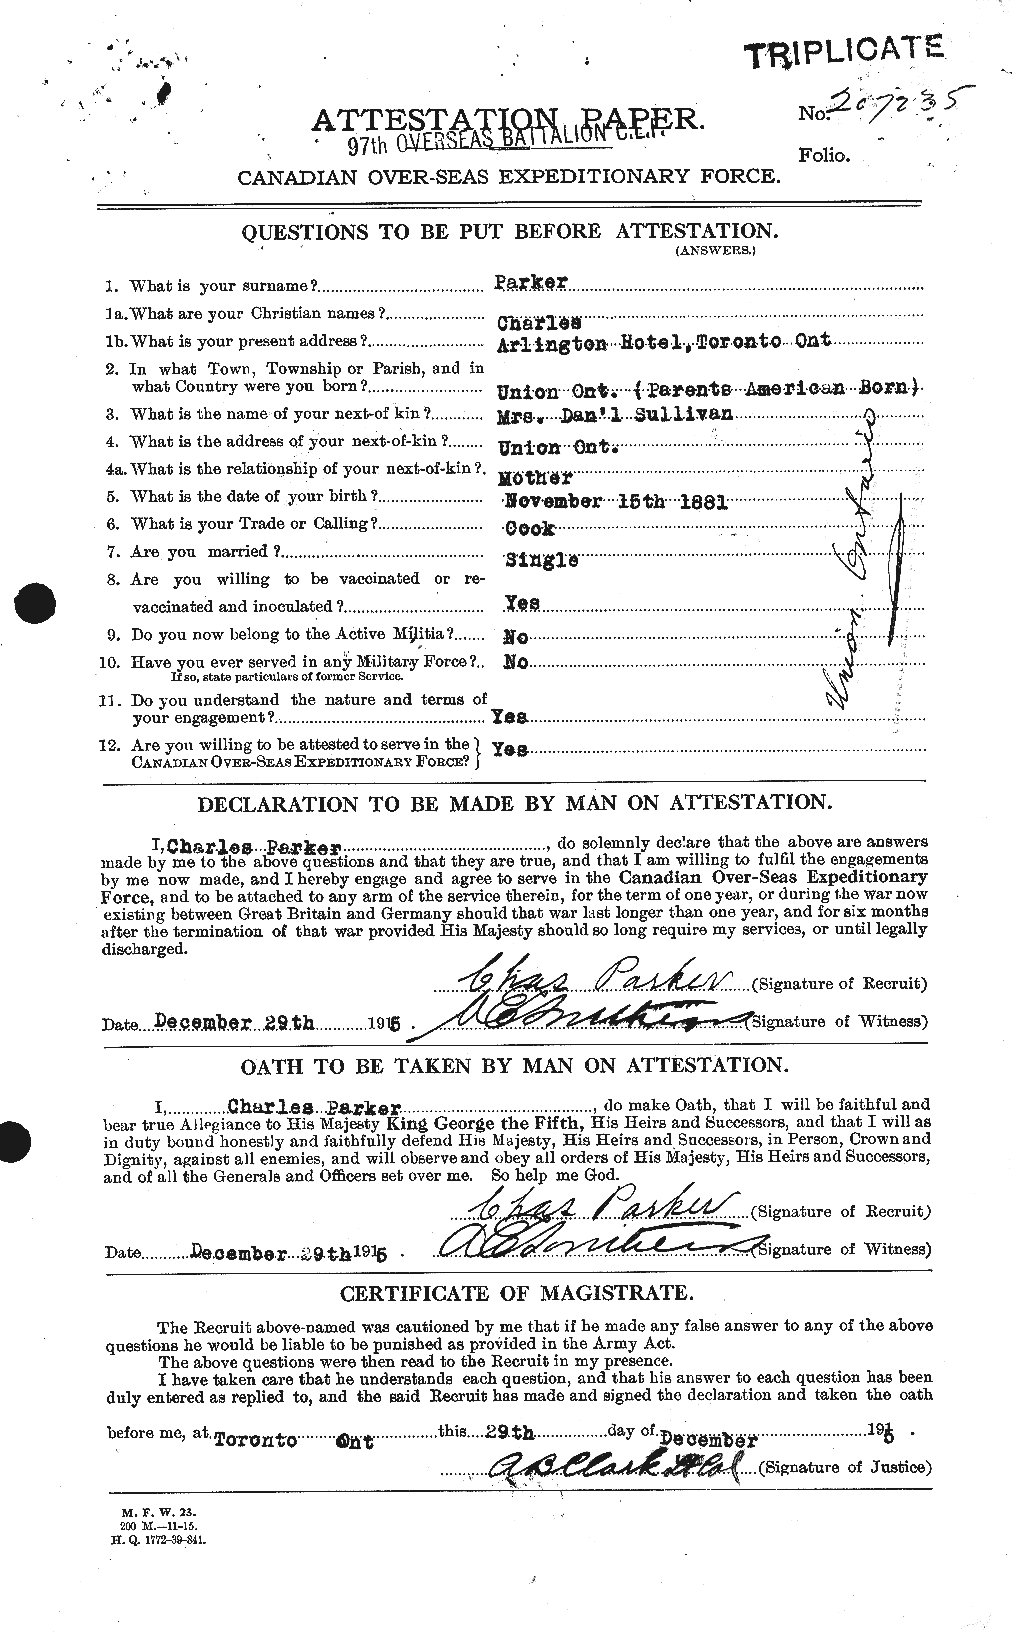 Personnel Records of the First World War - CEF 565057a